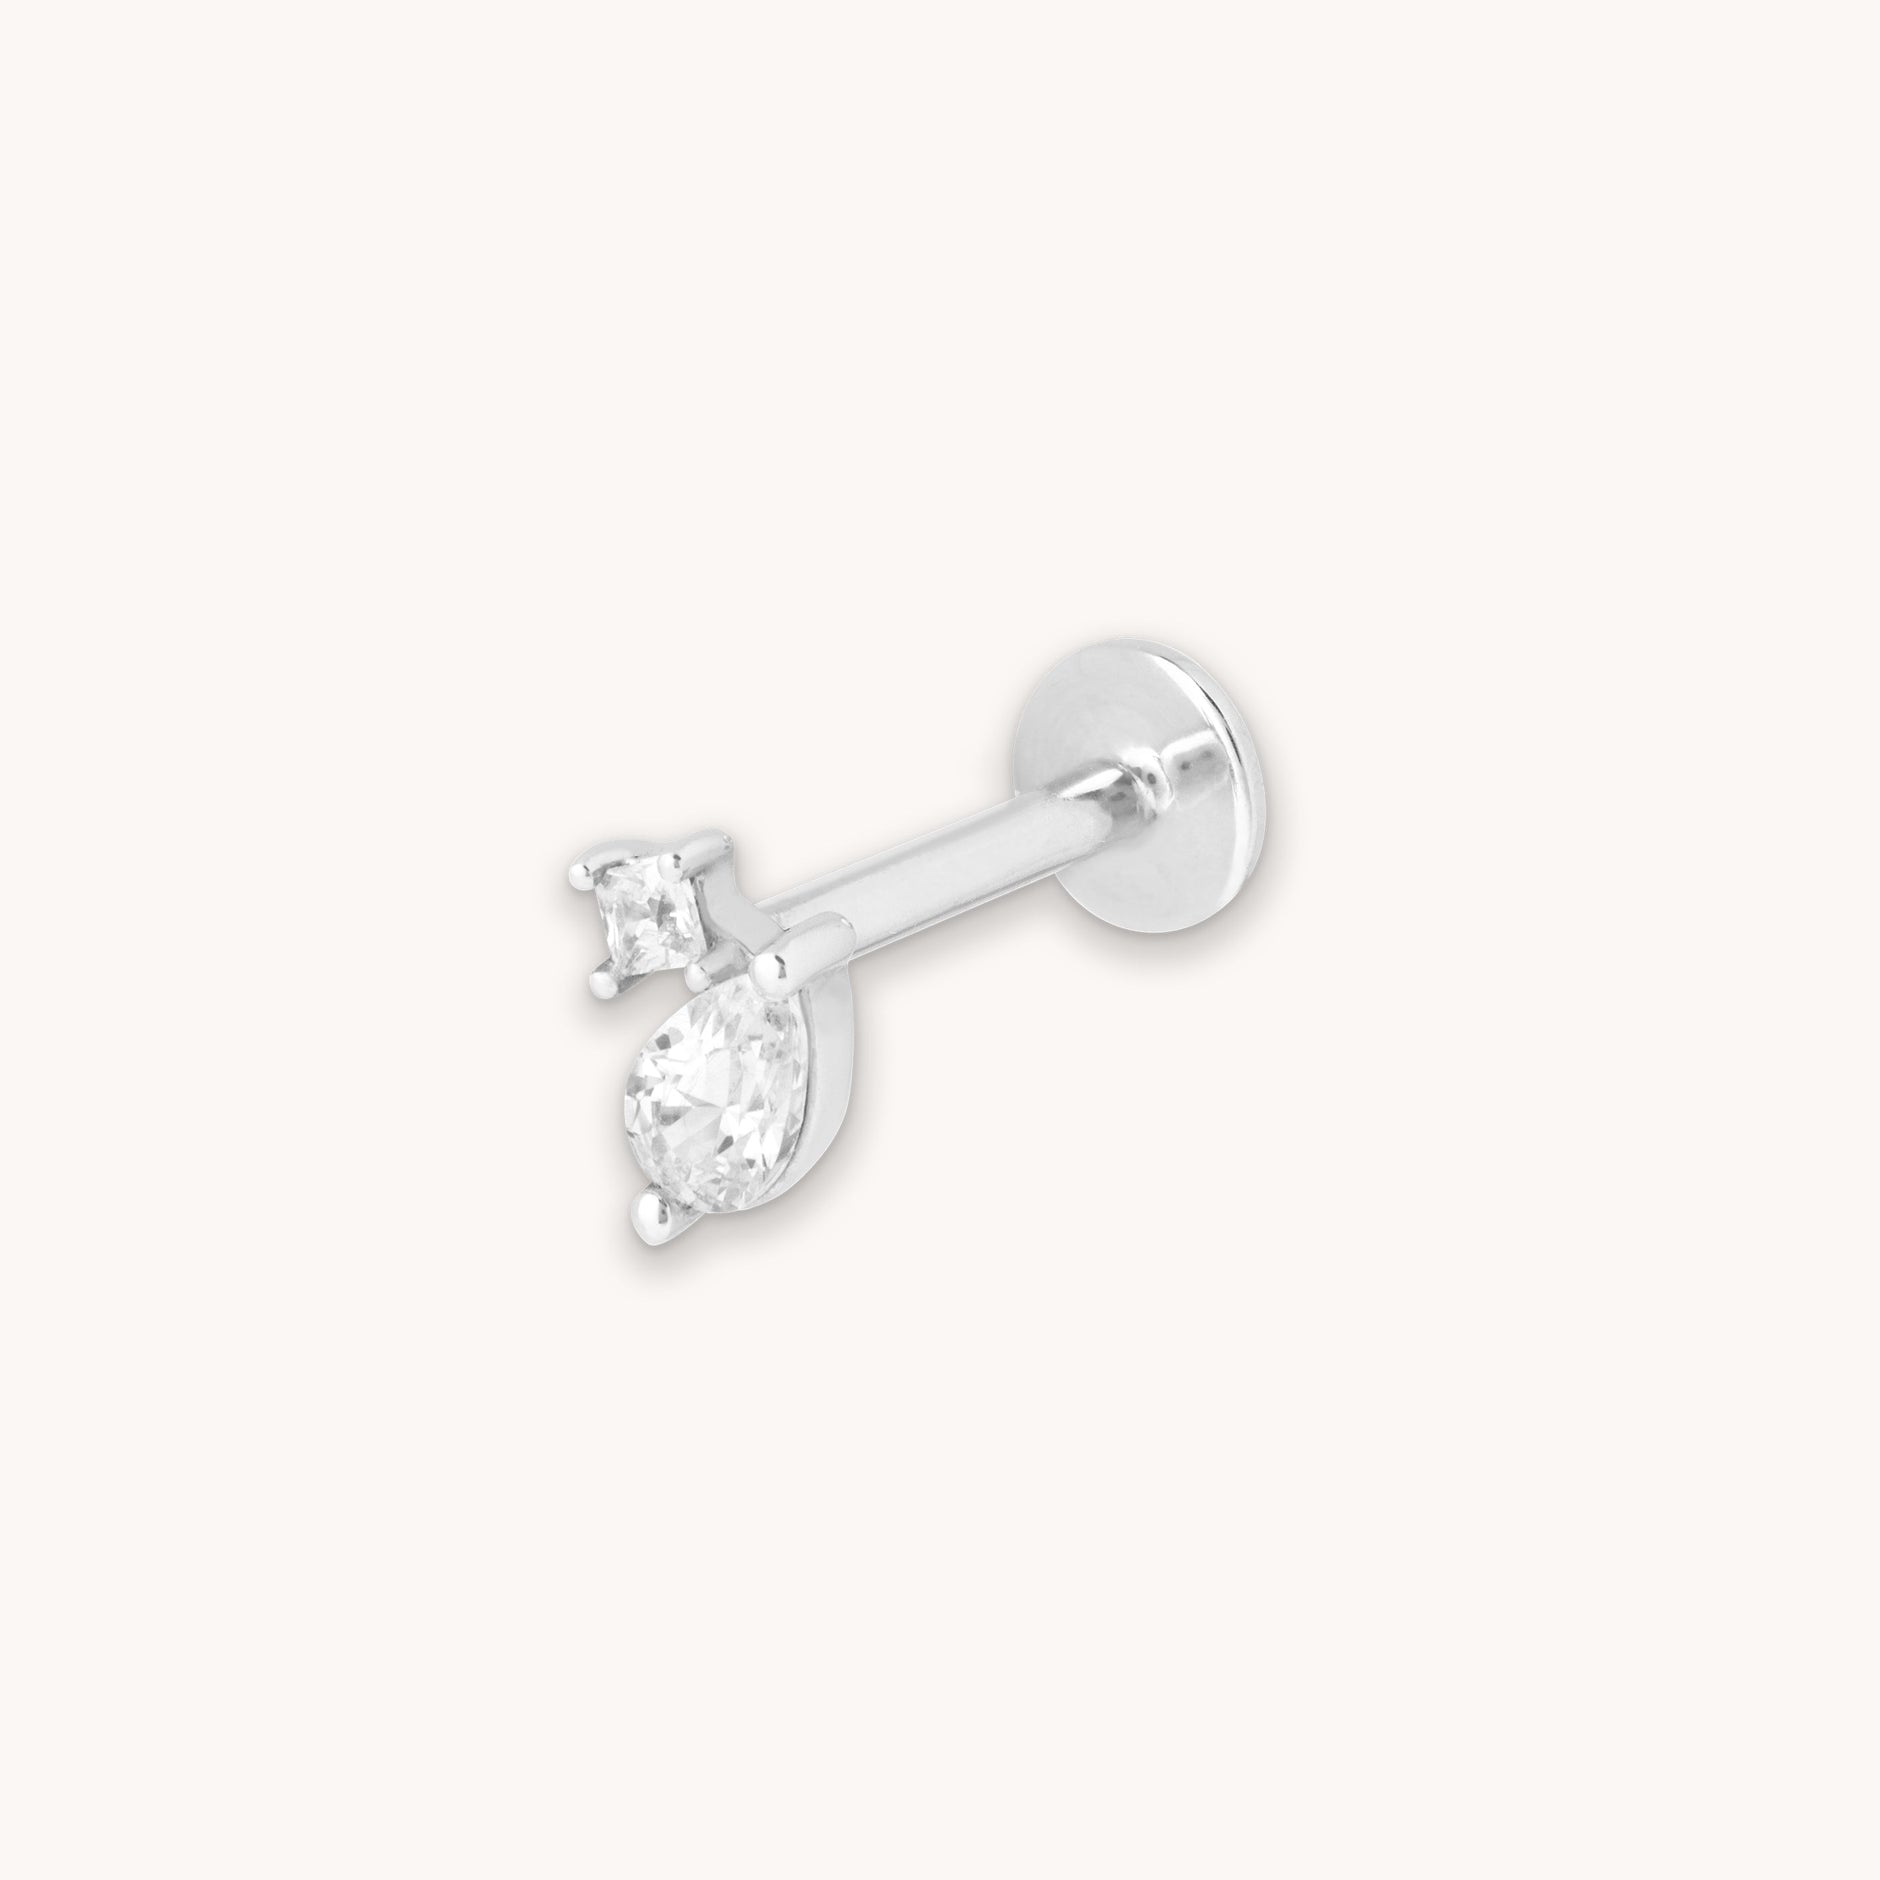 Double Gem Piercing Stud 6mm in Solid White Gold